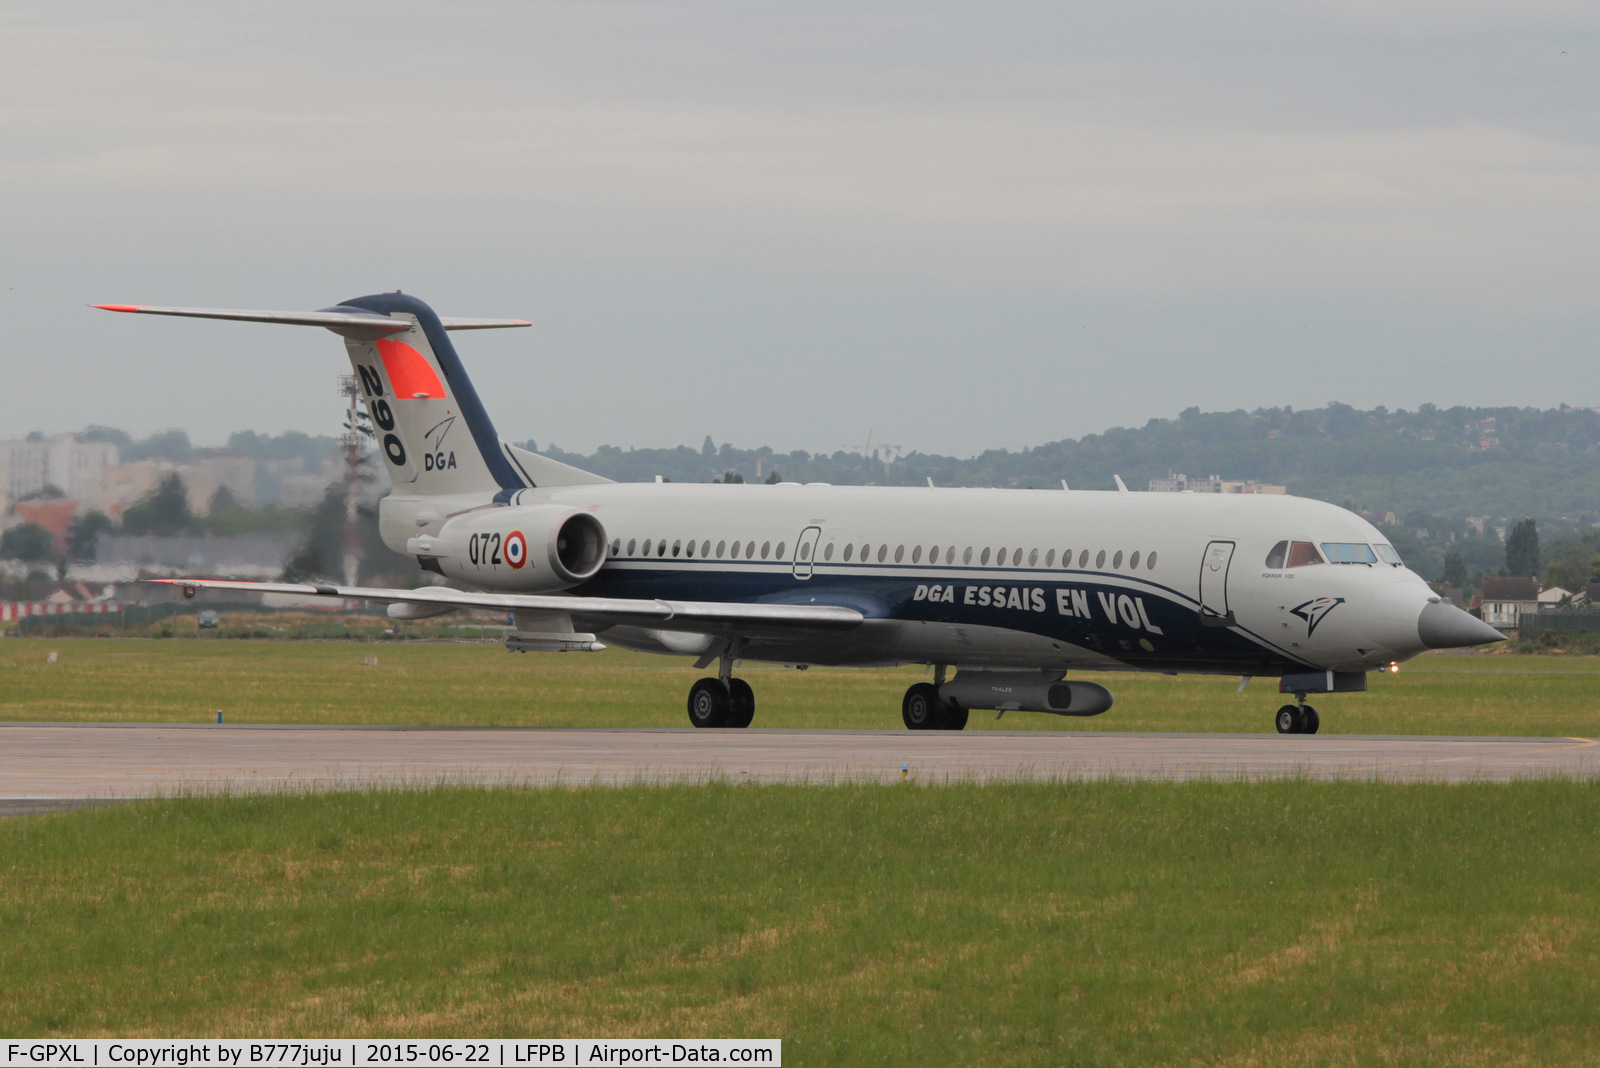 F-GPXL, 1990 Fokker 100 (F-28-0100) C/N 11290, at Le Bourget for SIAE 2015